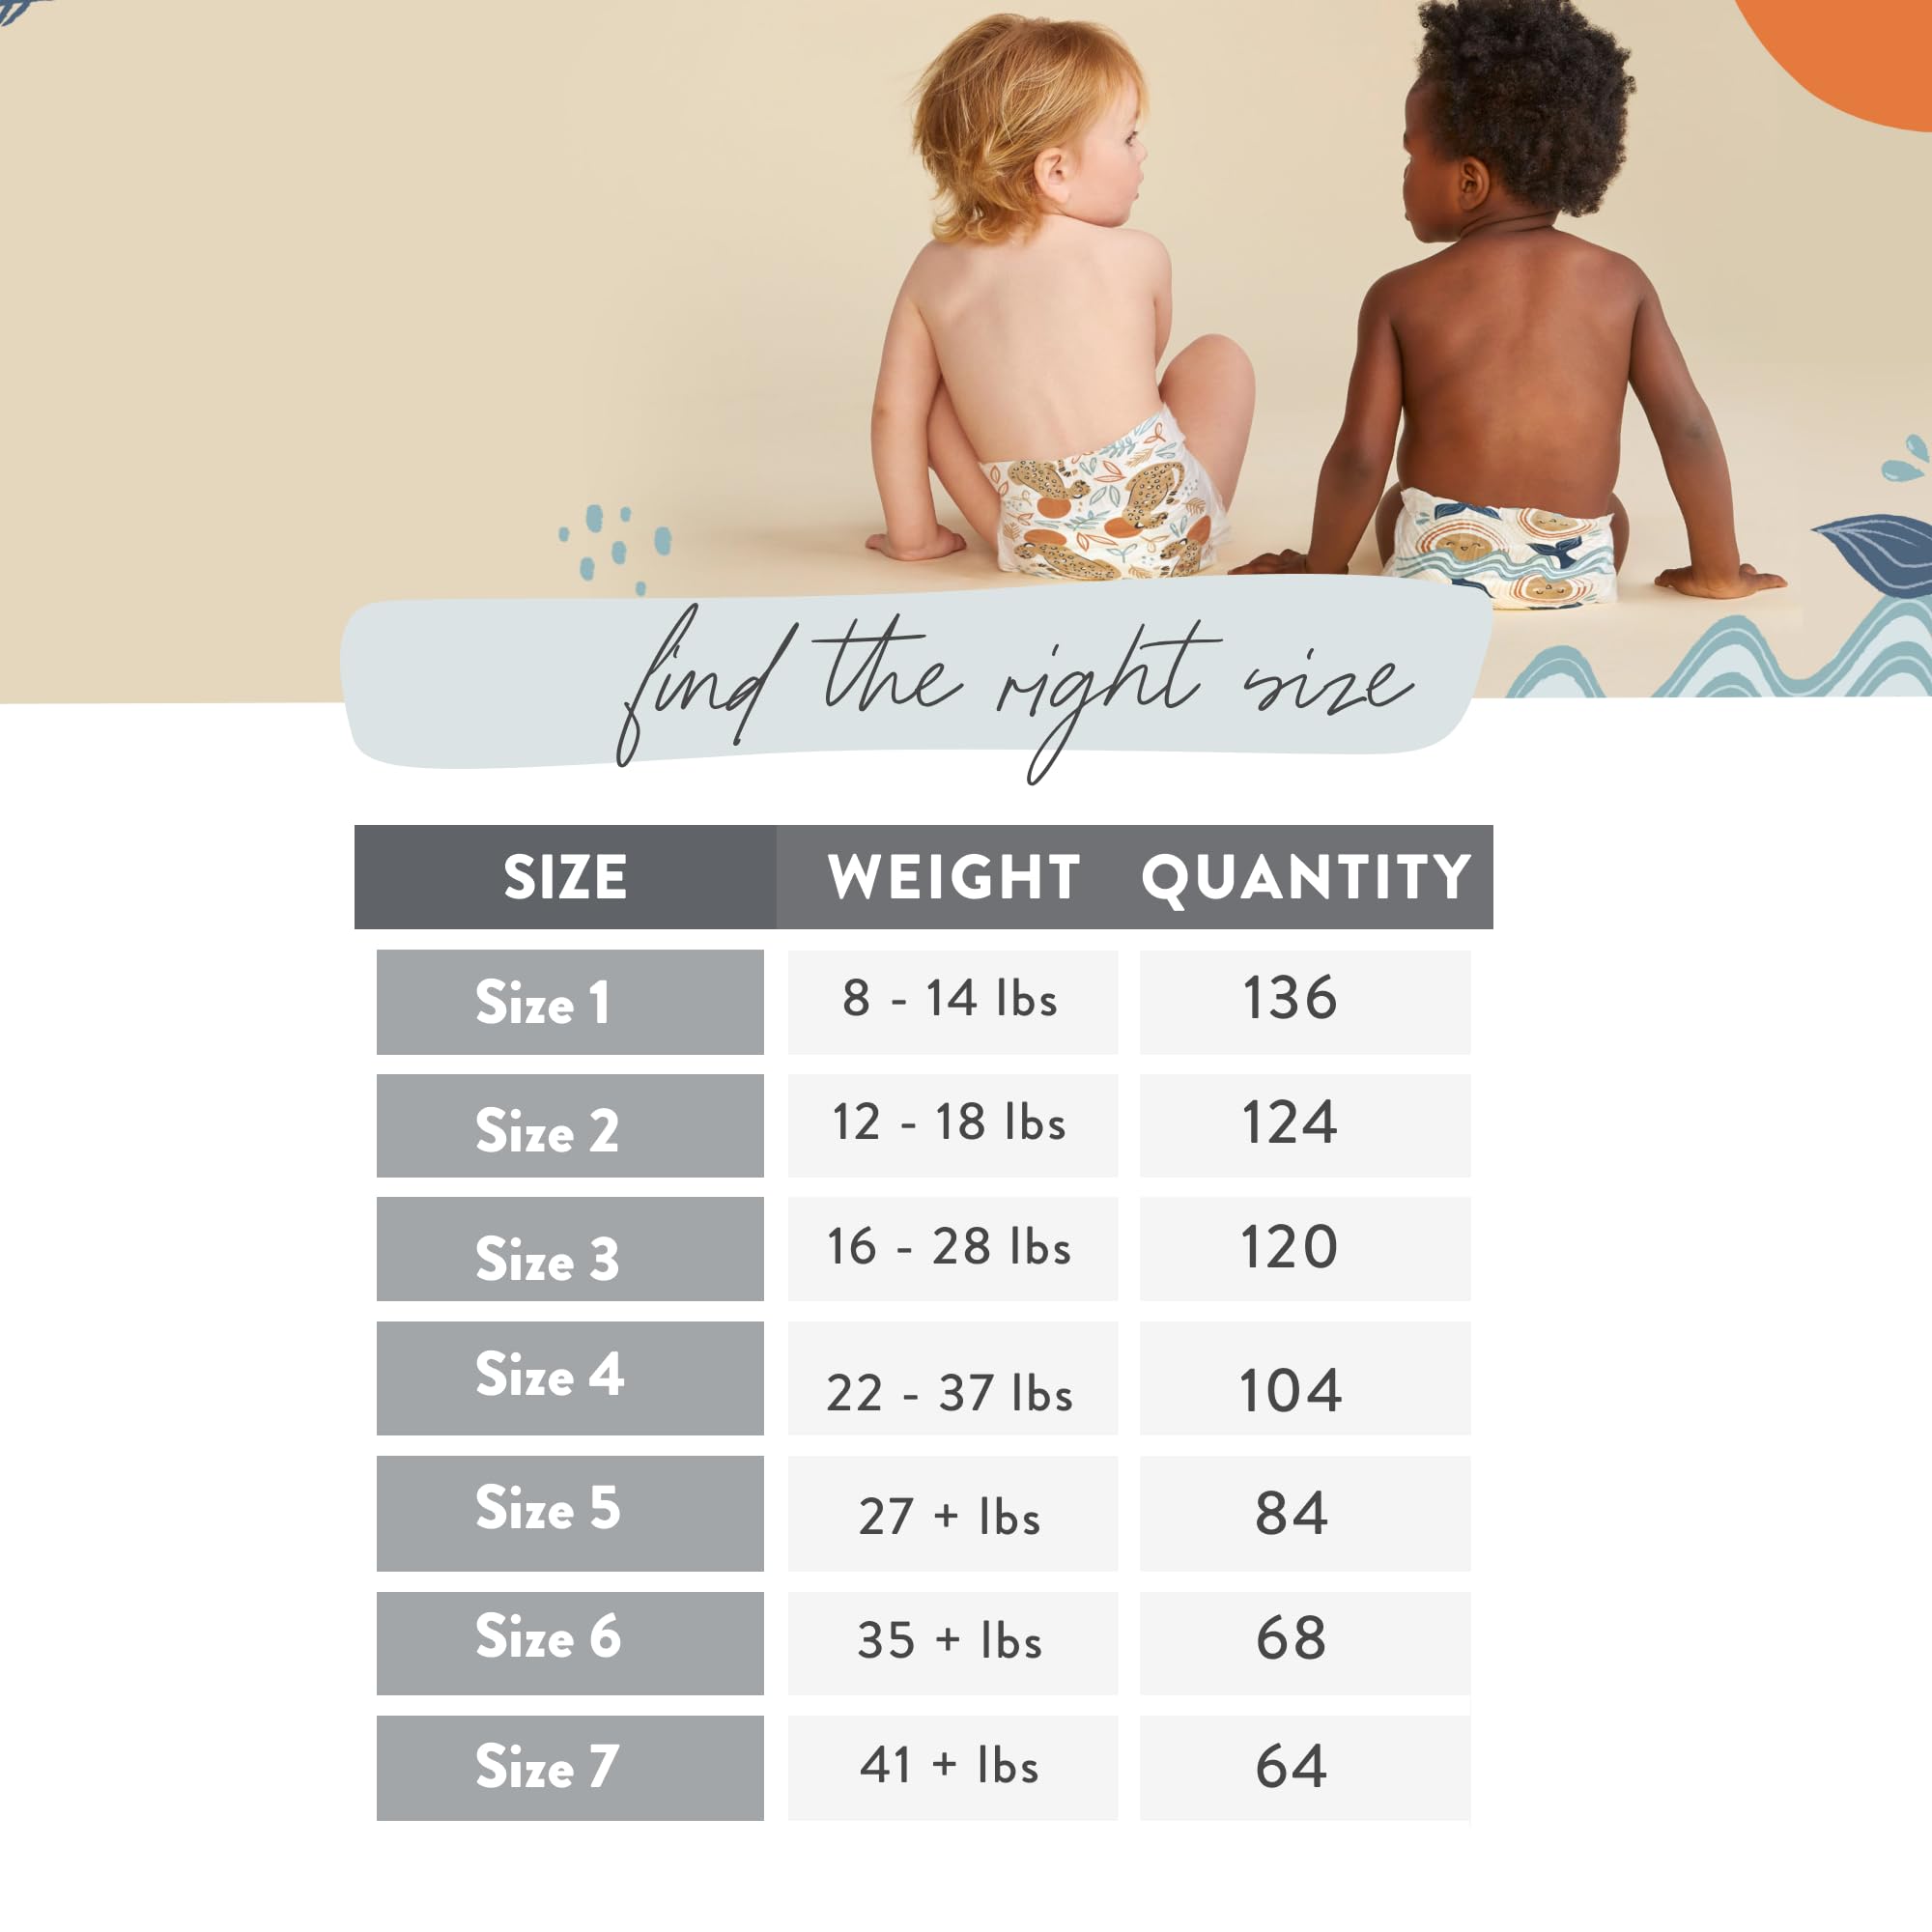 The Honest Company Clean Conscious Diapers | Plant-Based, Sustainable | Barnyard Babies + It’s A Pawty | Super Club Box, Size 7 (41+ lbs), 64 Count